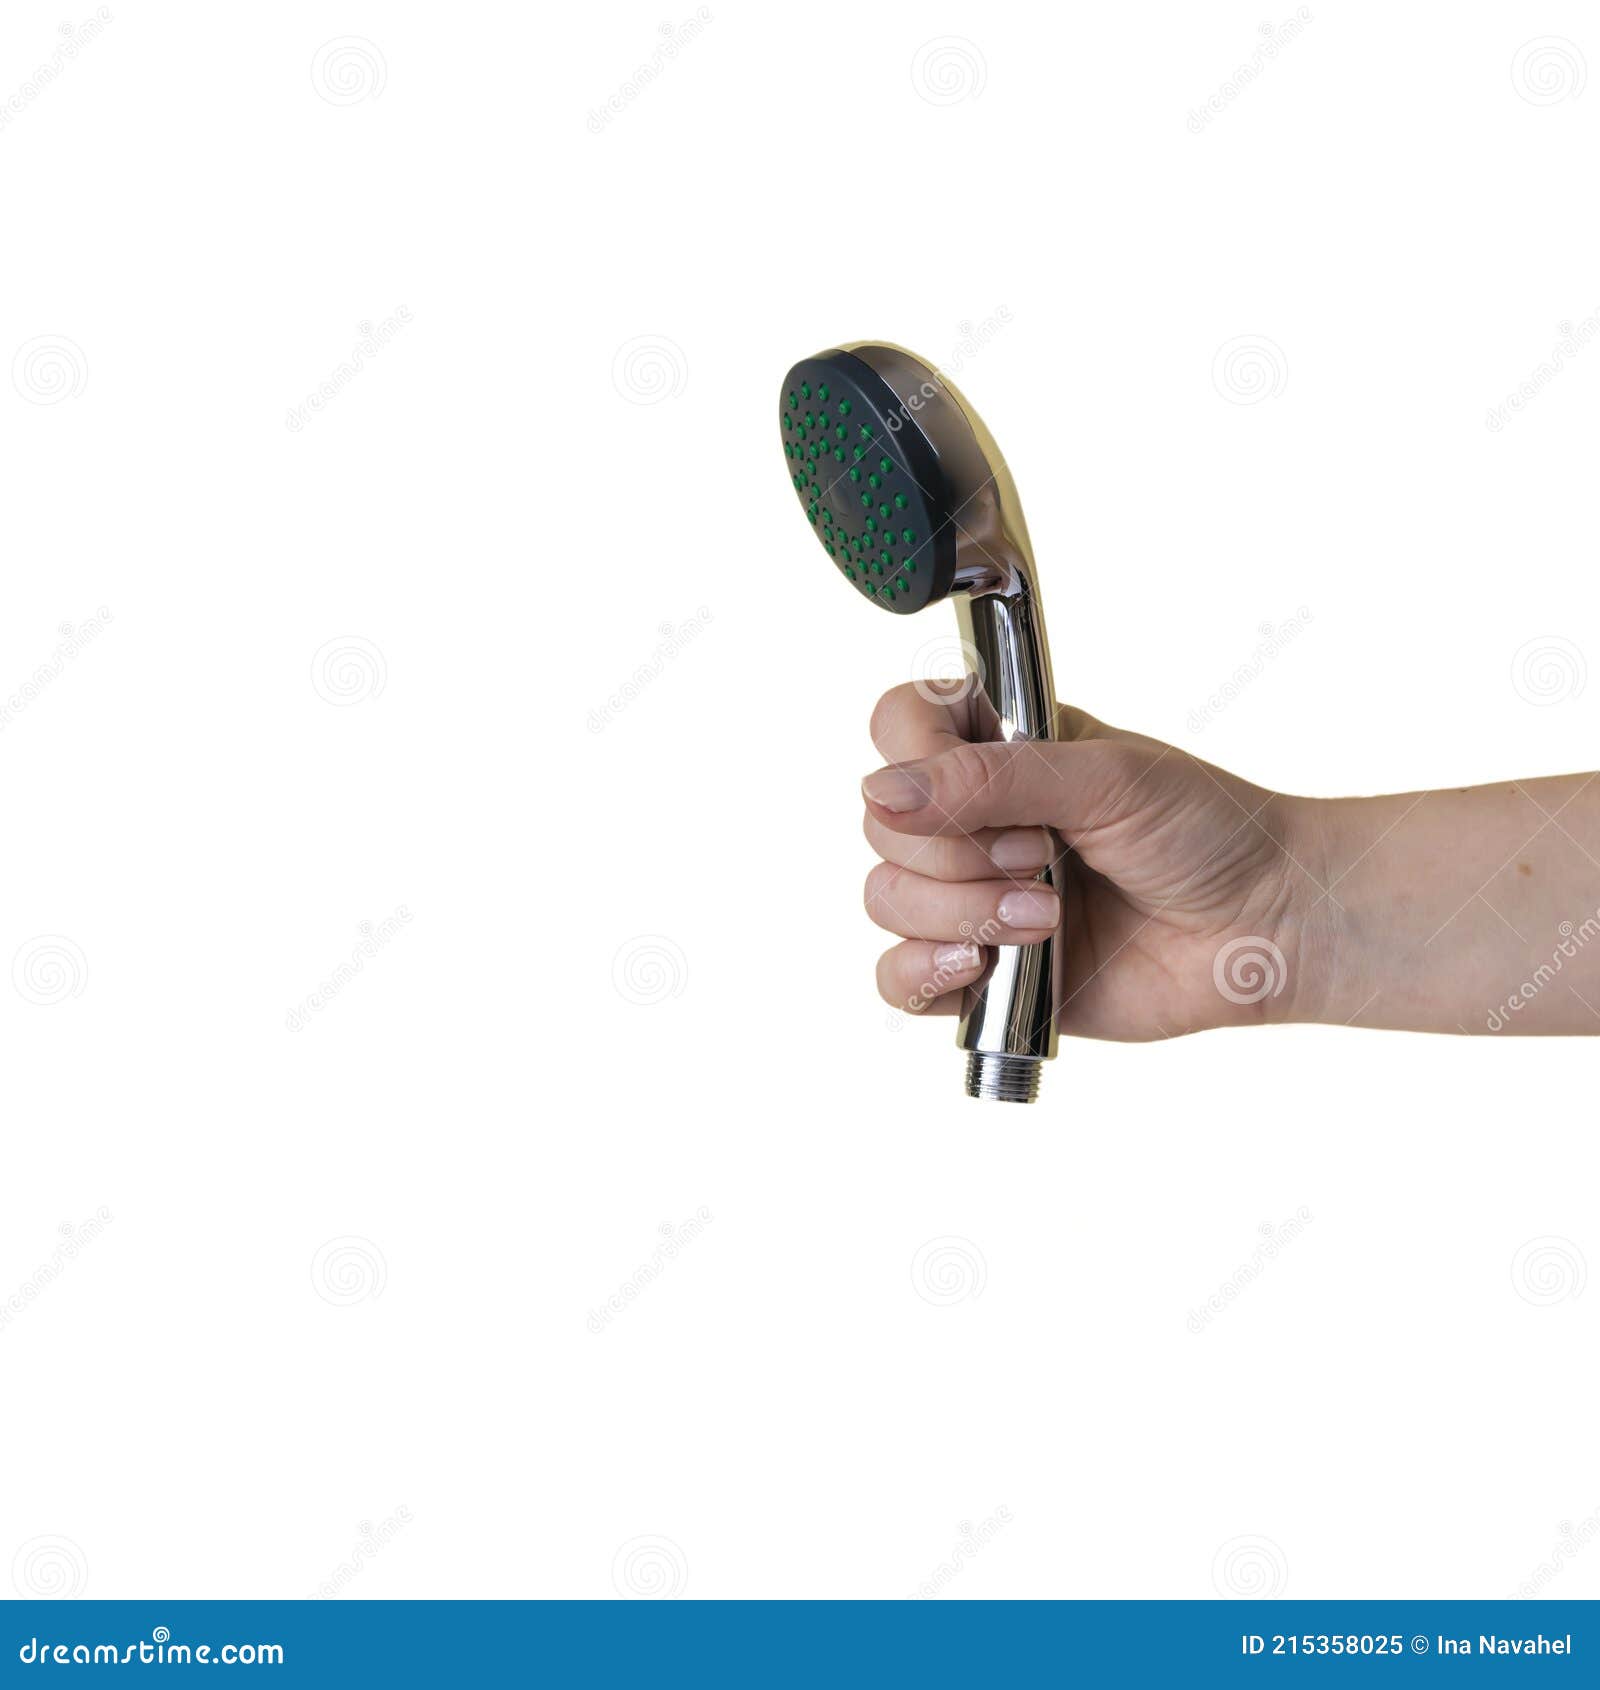 shower head in woman hand  on a white background